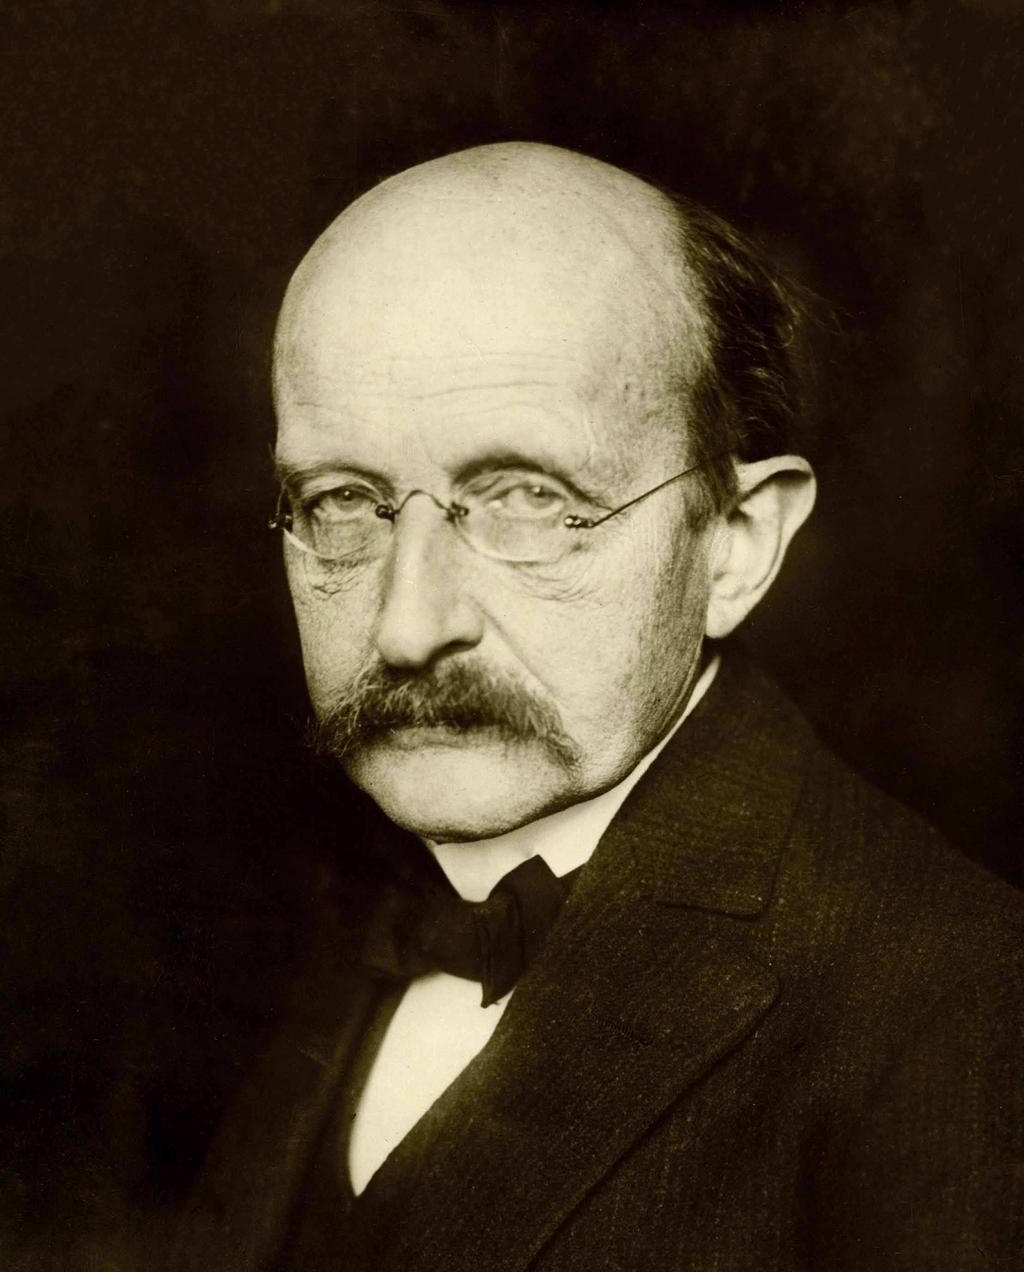 ... Blackbody radiation and the ultraviolet catastrophe... The work of Max Karl Ernst Ludwig Planck (1858 1947), ca. 1900 resolved this difficulty, and the Quantum Age truly began.